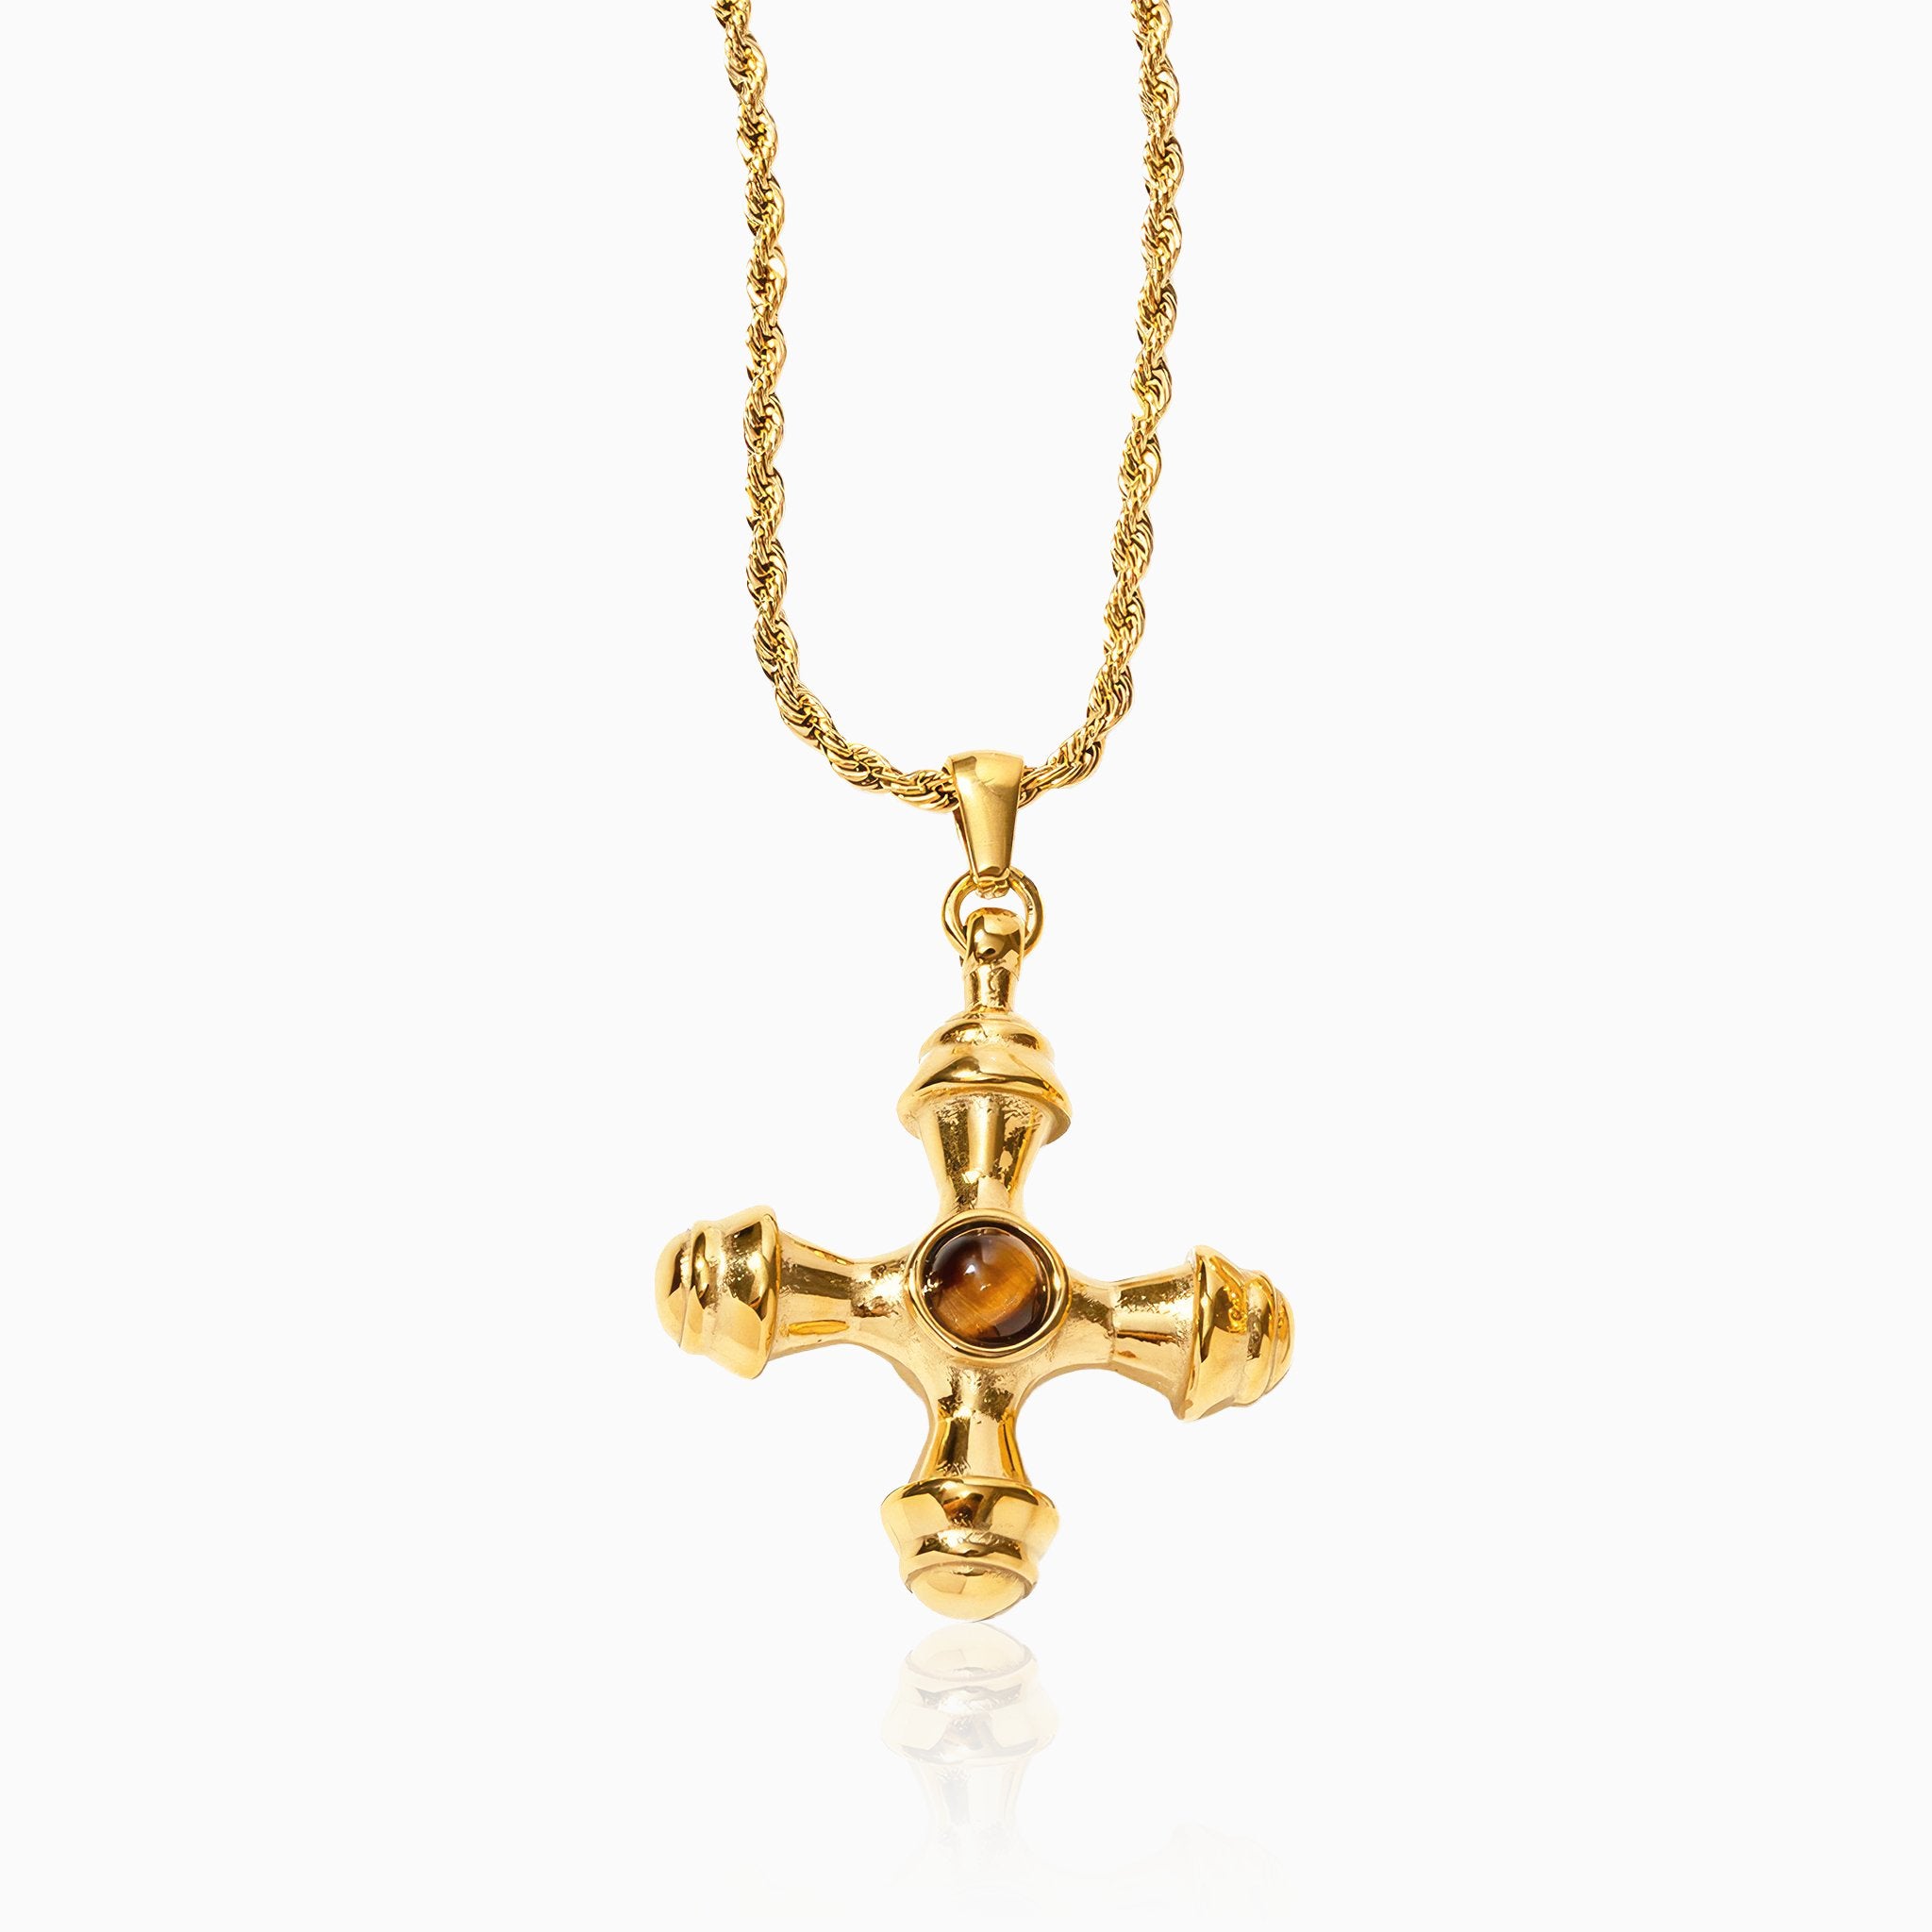 Cross Tiger Eye Necklace - Nobbier - Necklace - 18K Gold And Titanium PVD Coated Jewelry